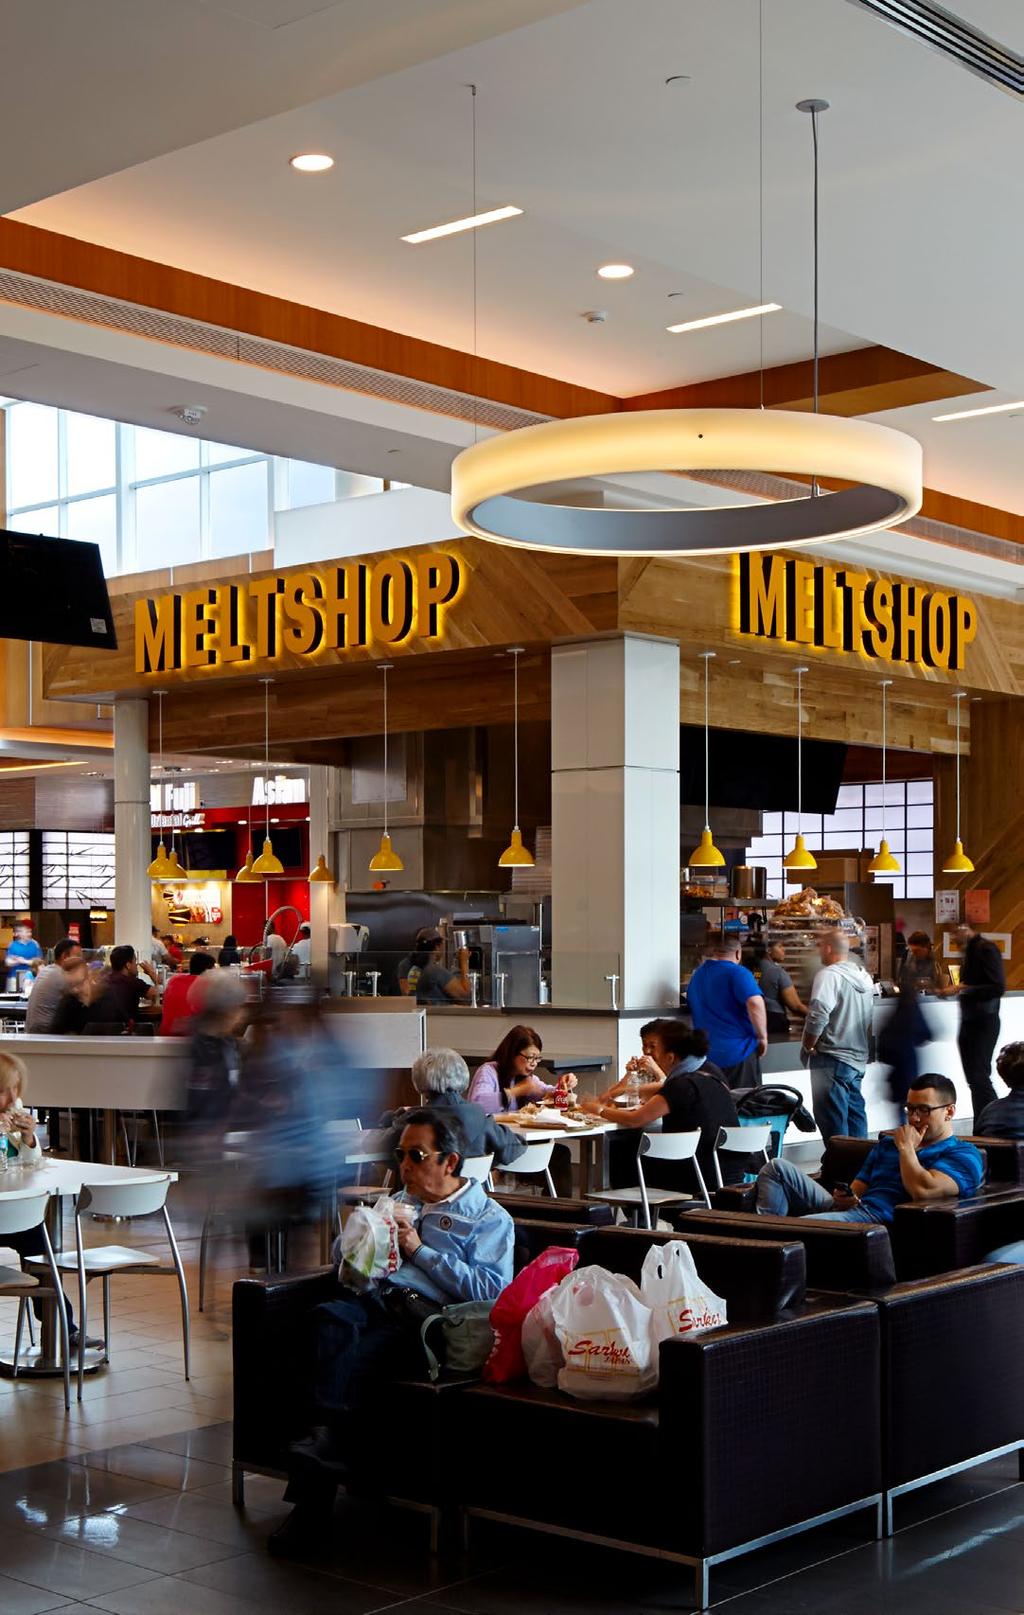 INDULGENT DINING & ENTERTAINMENT Opened in January 2015, Roosevelt Field s phenomenally popular Dining District features nine of Manhattan s most popular fast-casual restaurants, as well as other